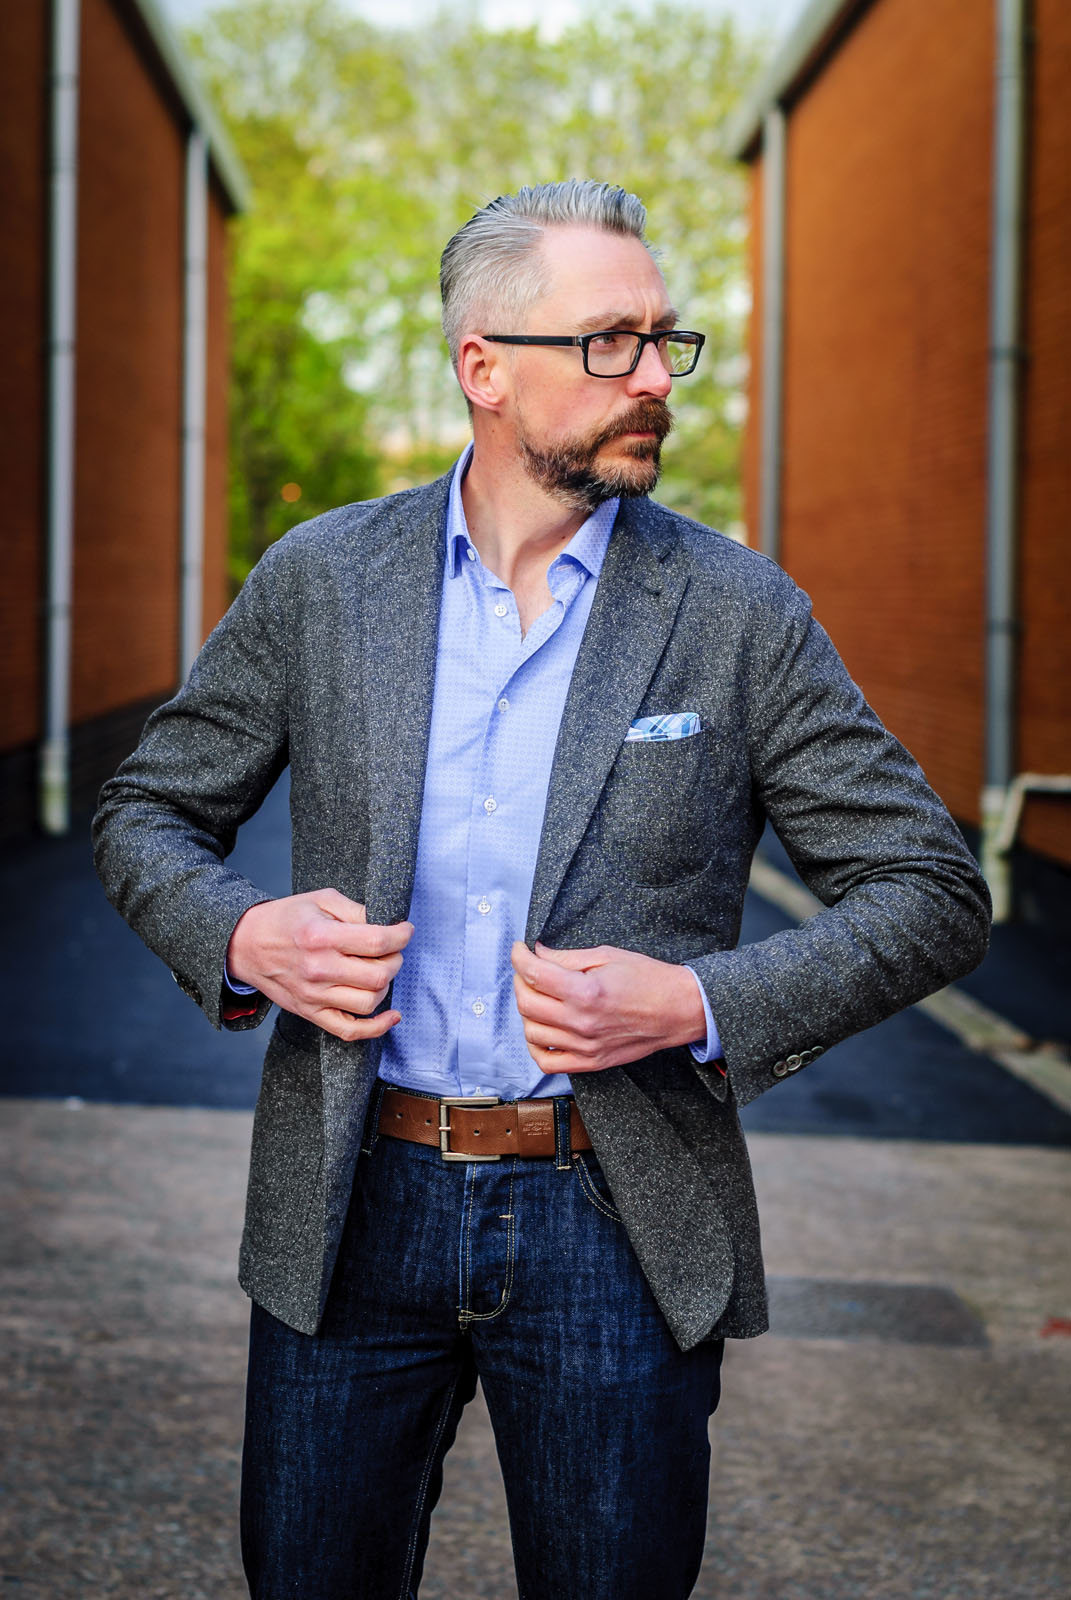 British workwear tailoring by Arthur Shirtley: Smart casual menswear outfit \ tweed blazer \ check shirt \ dark wash straight leg jeans \ brown high top brogues | Silver Londoner, over 40 menswear